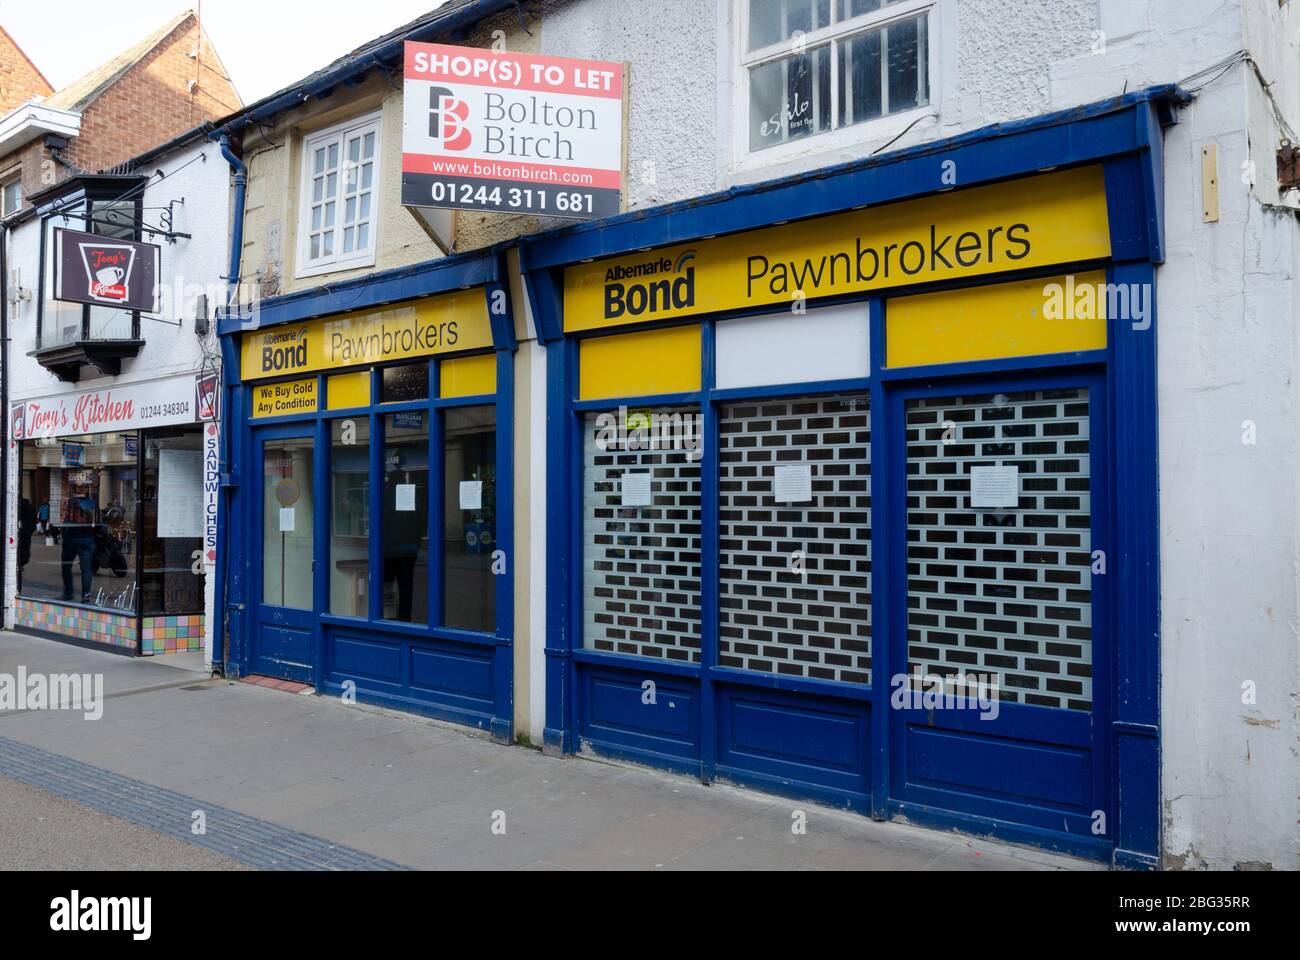 Chester, UK: Mar 1, 2020: Empty shop premises available to let on Frodsham Street. The premises were previously occupied by Albermarle Bond Pawnbroker Stock Photo